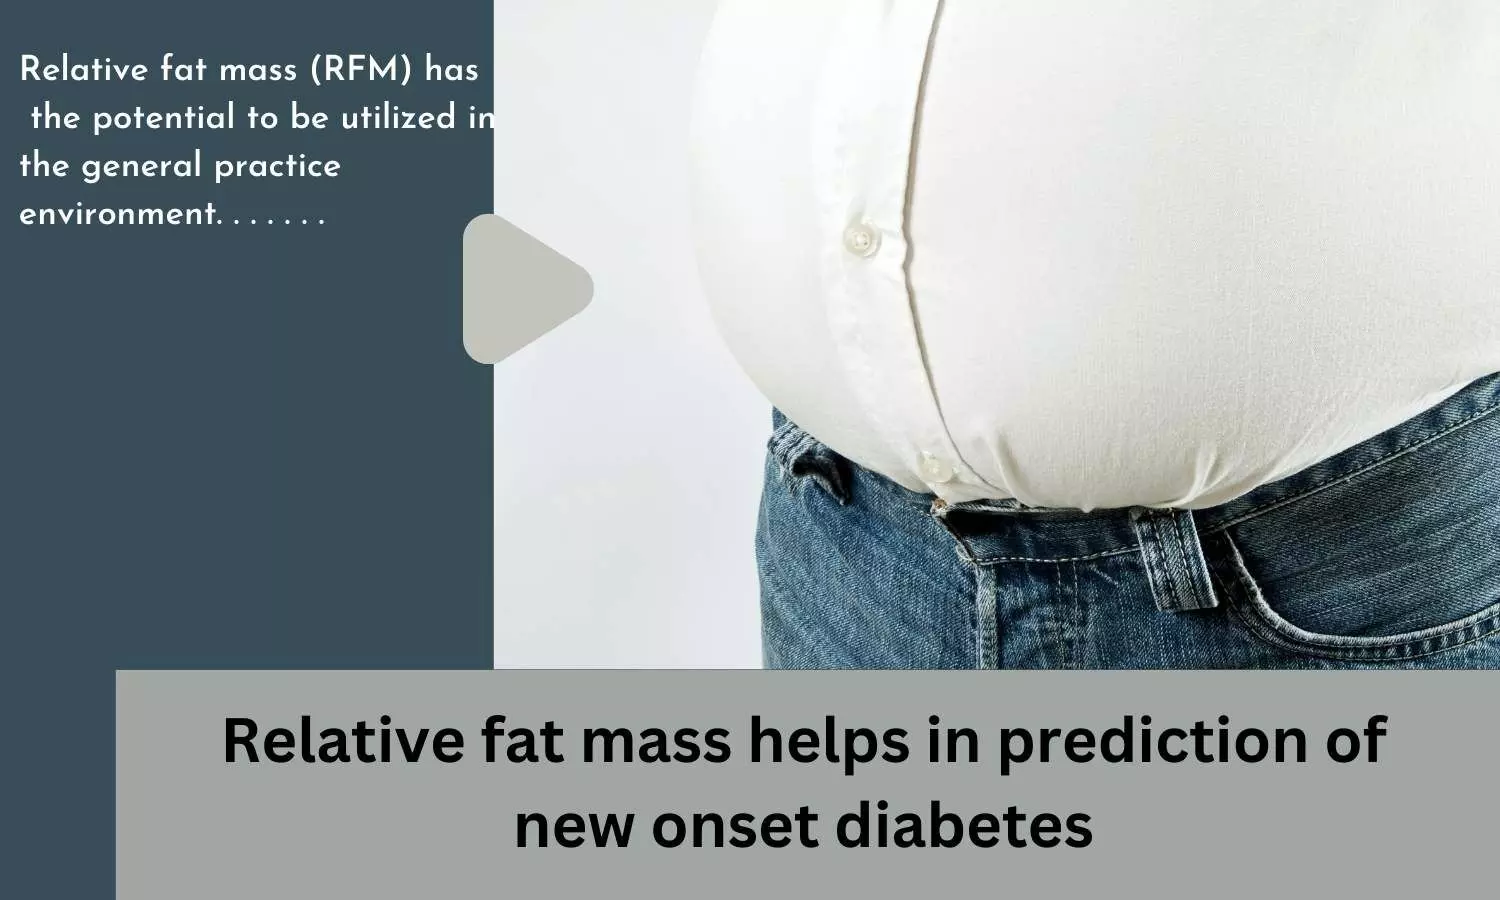 Relative fat mass helps in prediction of new onset diabetes